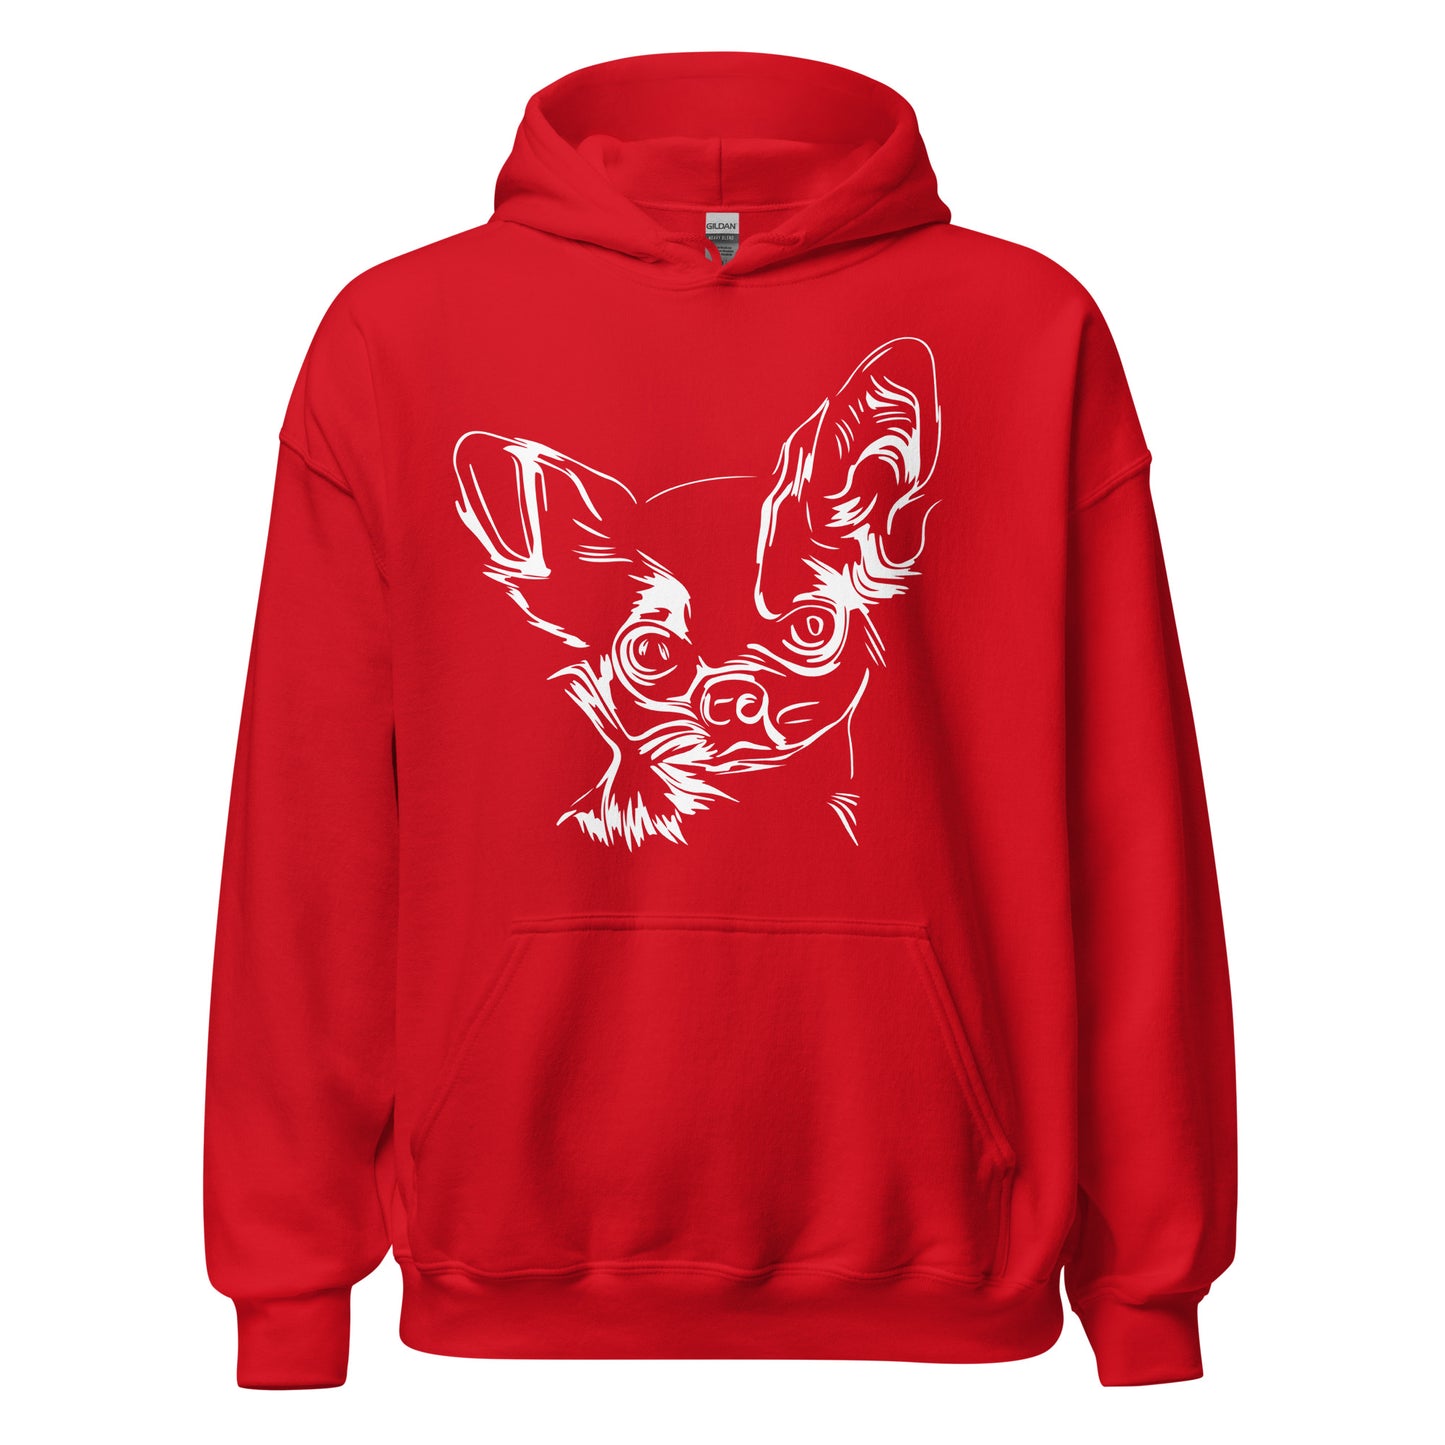 White line Chihuahua face on unisex red hoodie